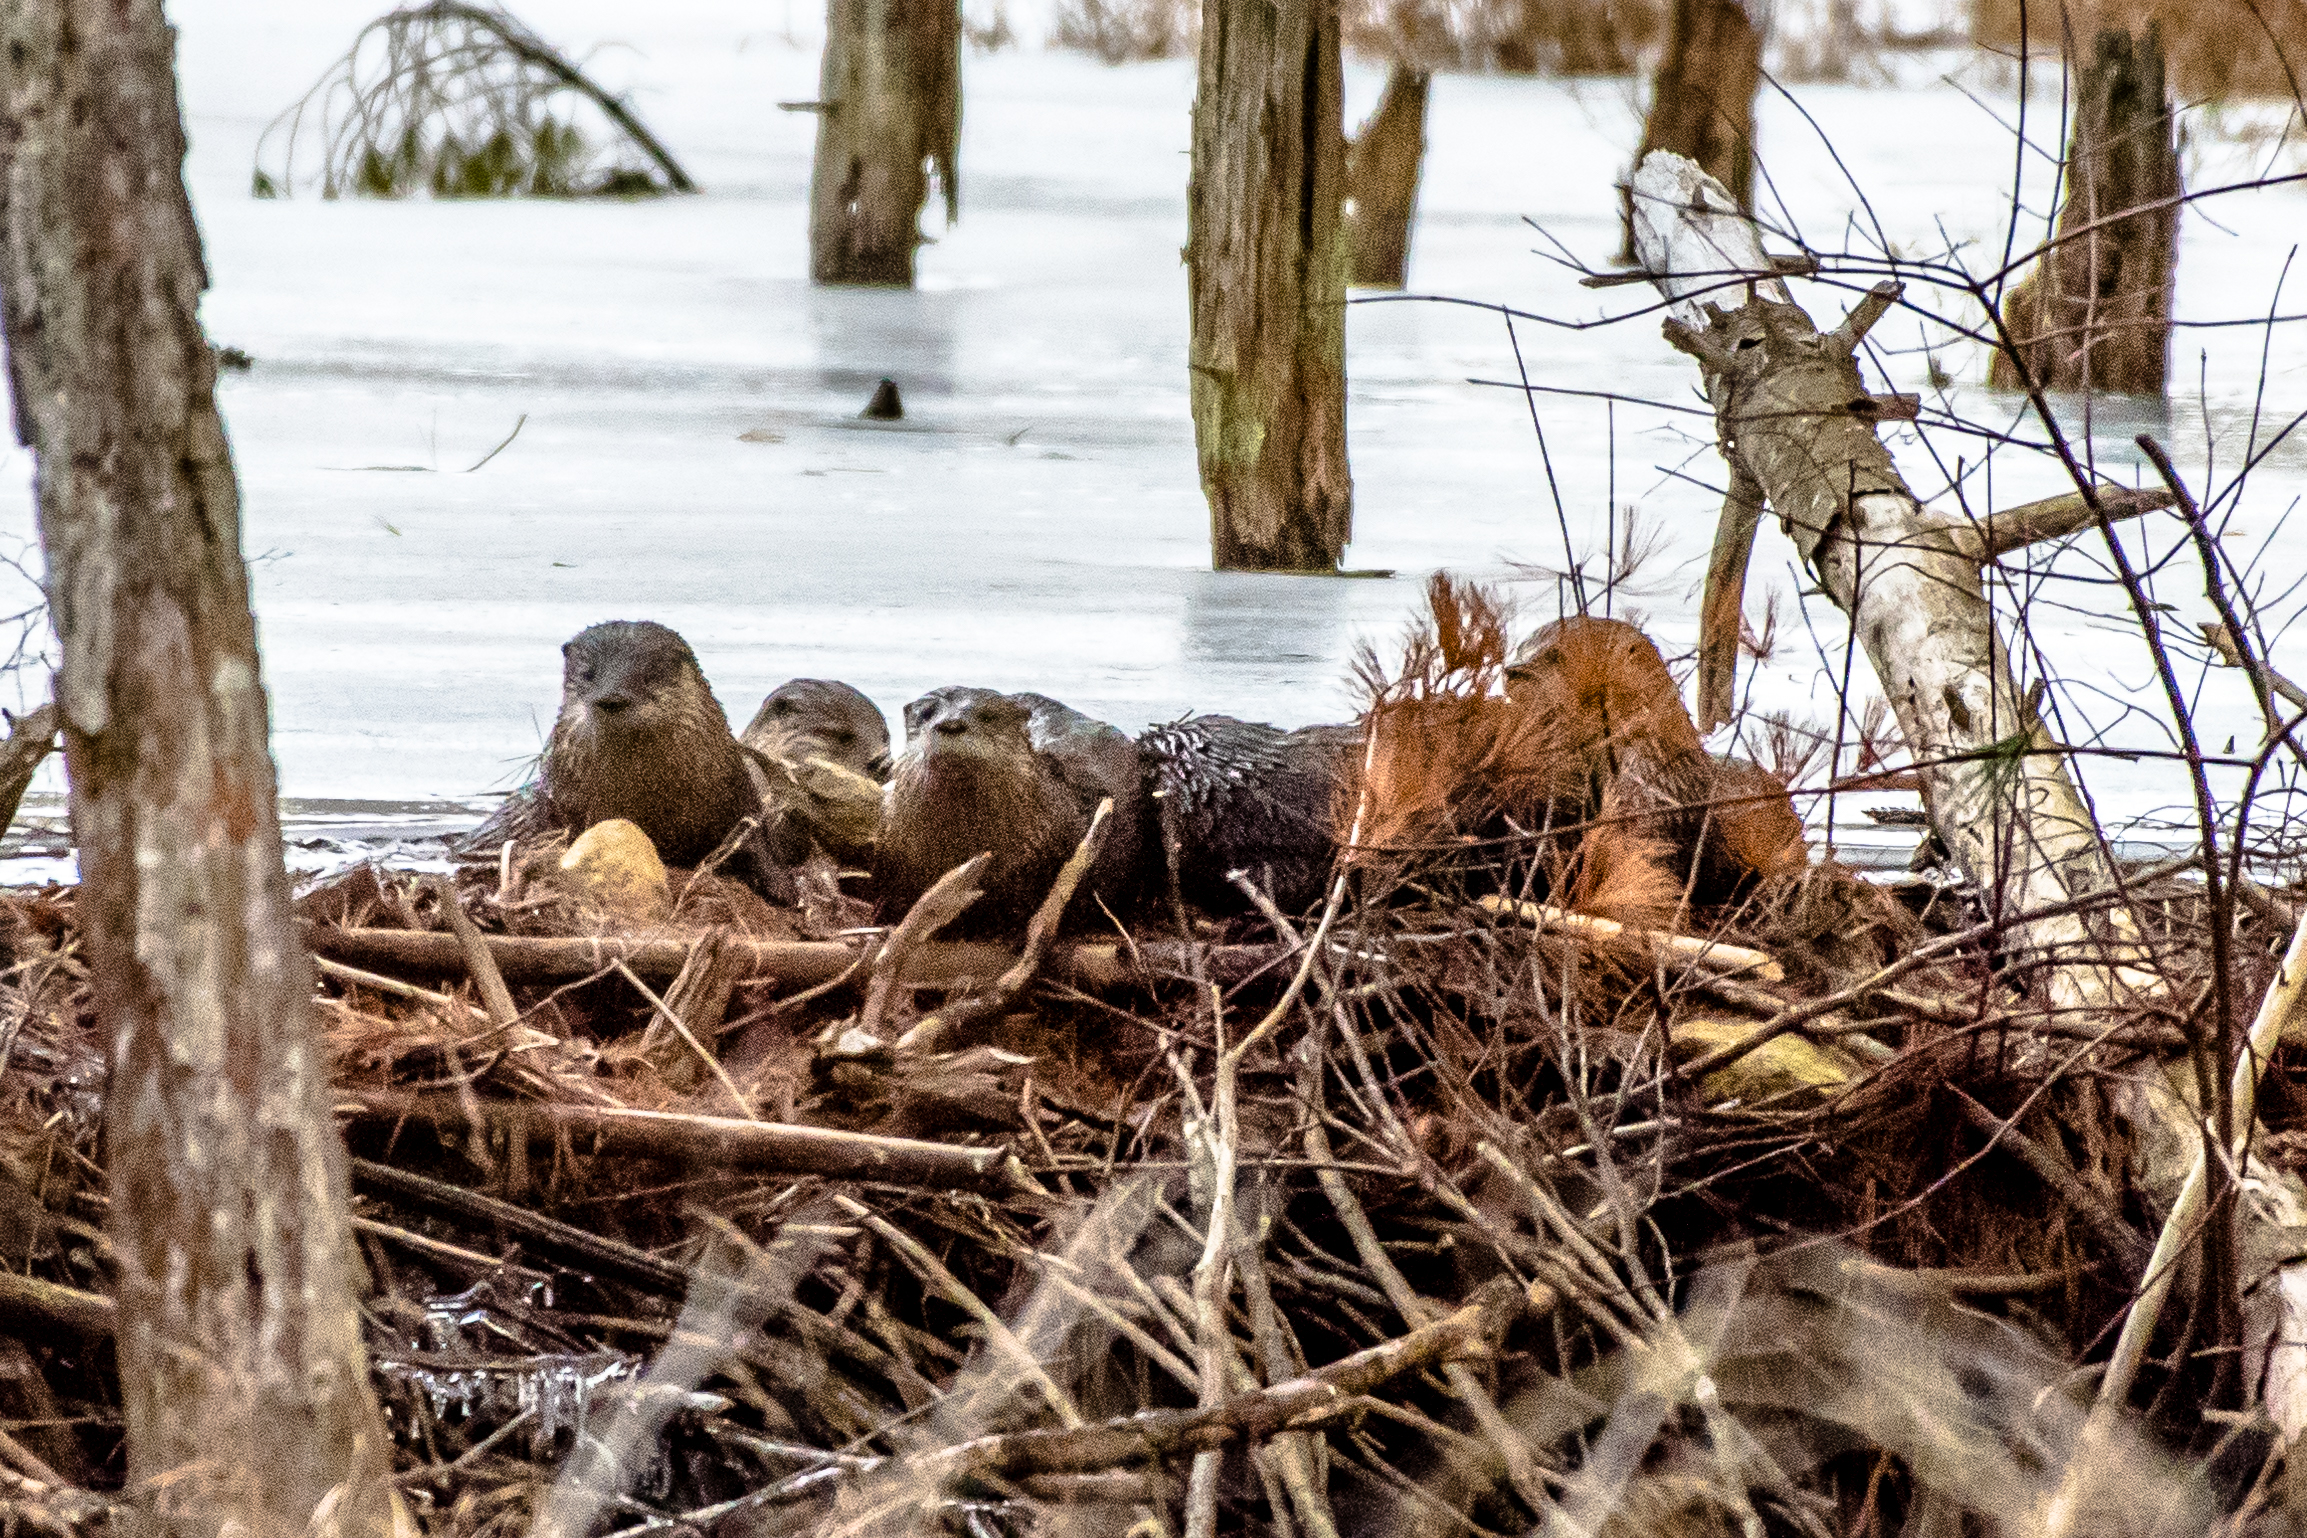   I took a family portrait of 5 river otters early this morning. Its always great fun to watch one or two but there was probably 2 adults and 3 young ones from last spring for a total of 5. What a blast! &nbsp;Did you know rivers otters have 1 millio